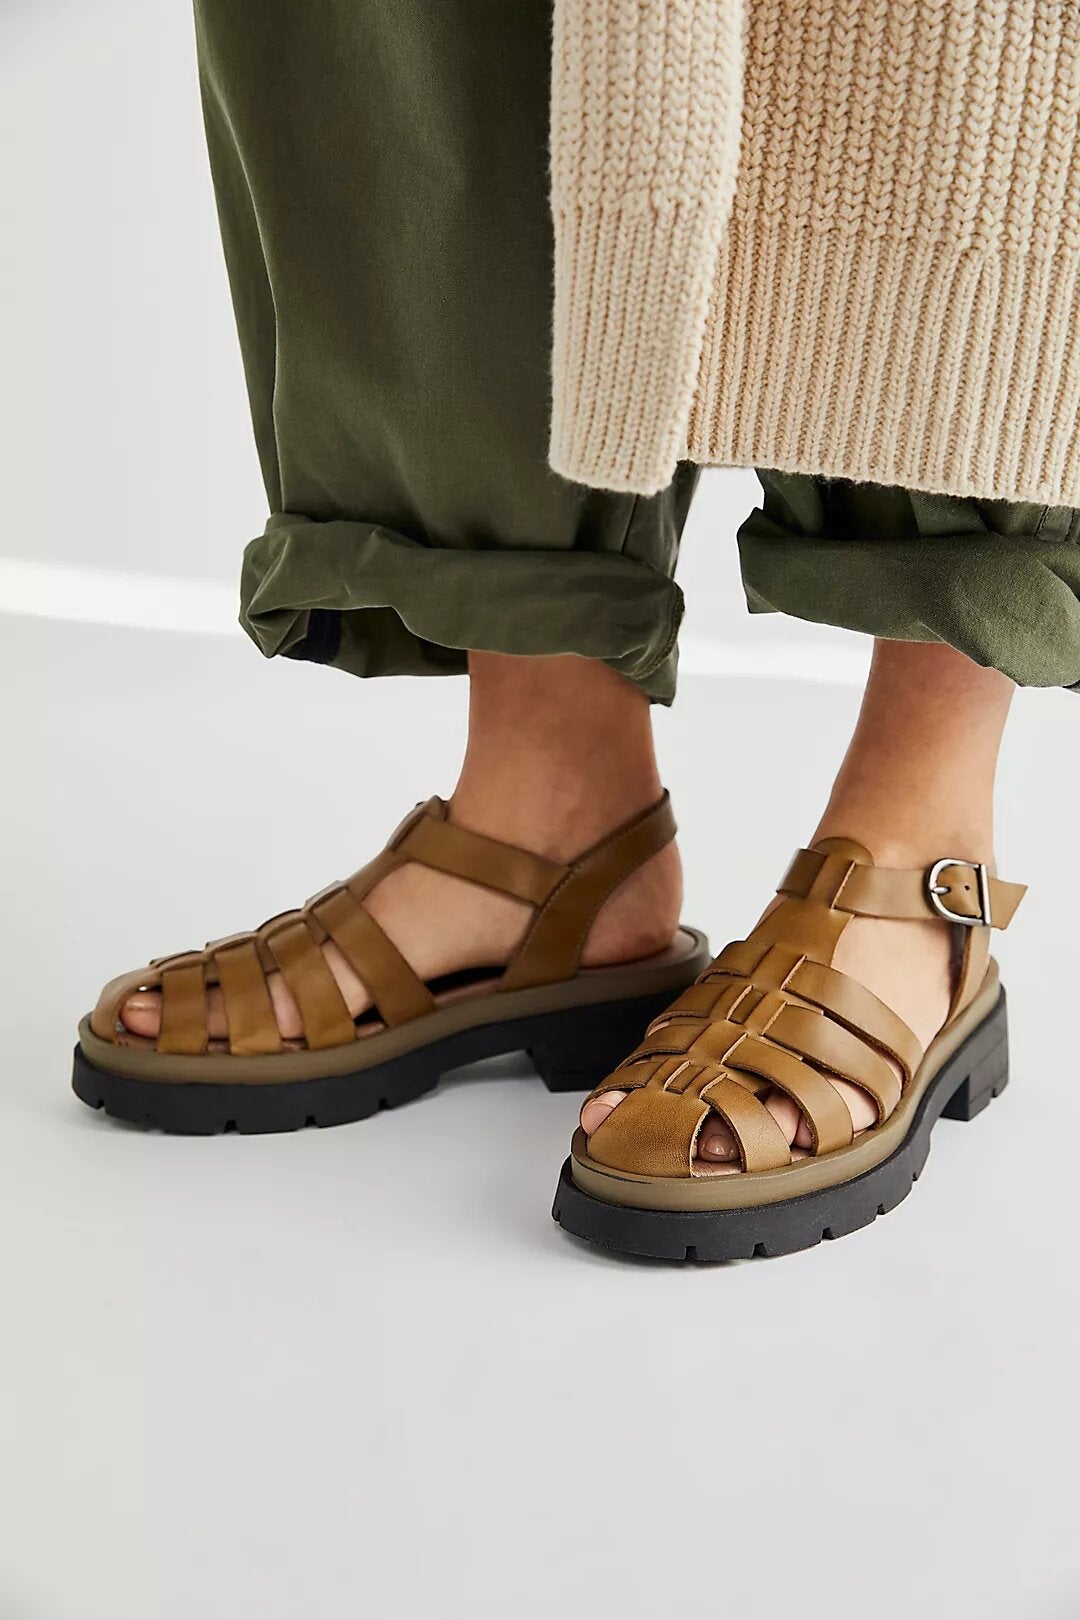 Fisherman Sandals Will Be Everywhere This Spring